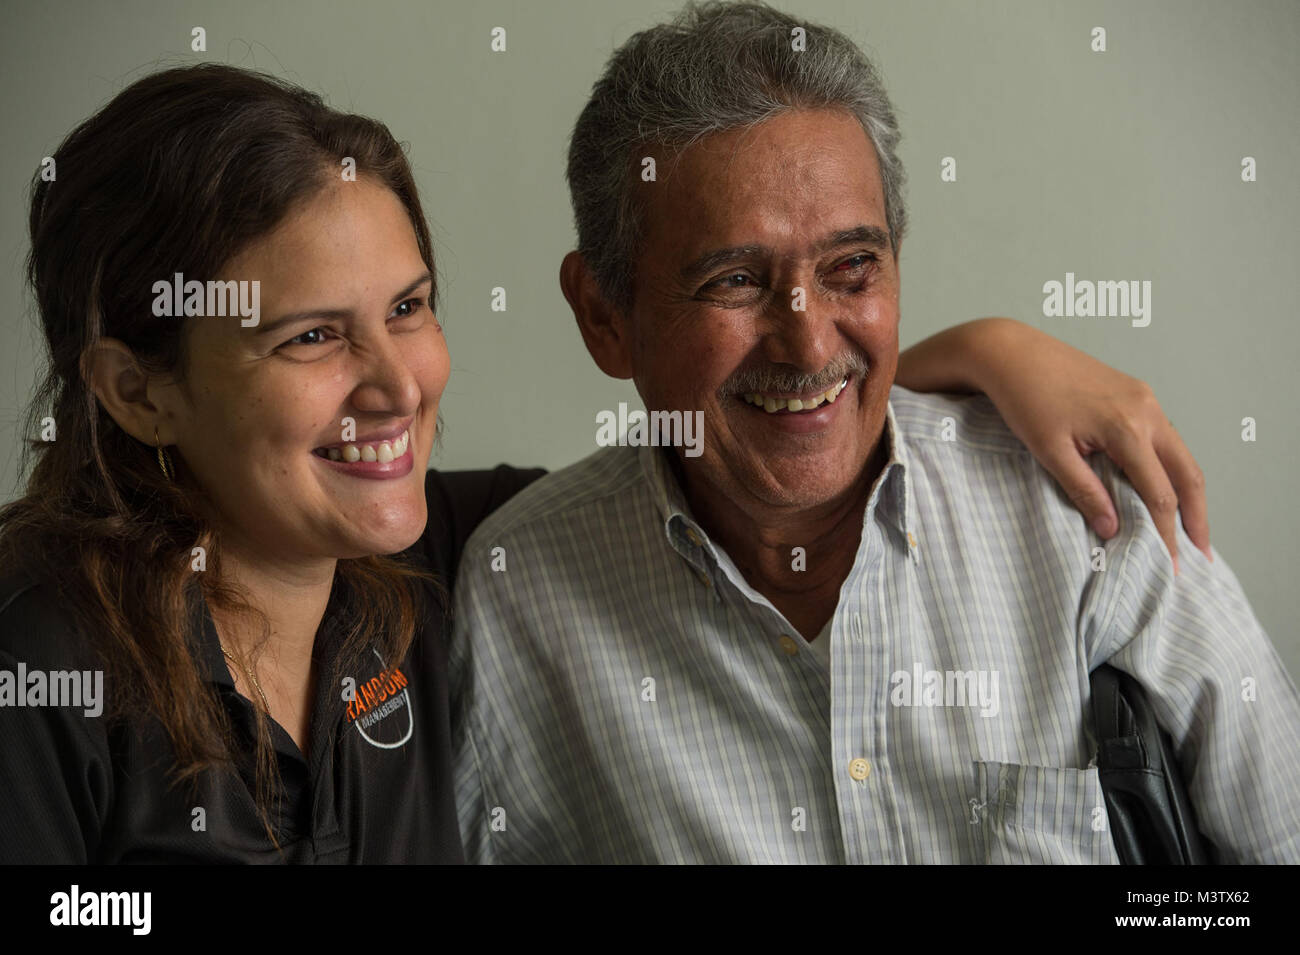 Eduardo Barrera and his daughter Mariyoly smile after Eduardo's post-operation surgery appointment, Feb. 7, 2017. He received an extracapsular cataract extraction with intraocular implant surgery the day before at the Centro Hospitalario Luis 'Chicho' Fabrega during a medical readiness training exercise in Santiago, Panama. A U.S. military medical team was in Panama to help treat individuals with cataracts that otherwise would have gone untreated. Medical readiness training exercises provide U.S. military personnel training in delivery of medical care in austere conditions, promote diplomatic  Stock Photo